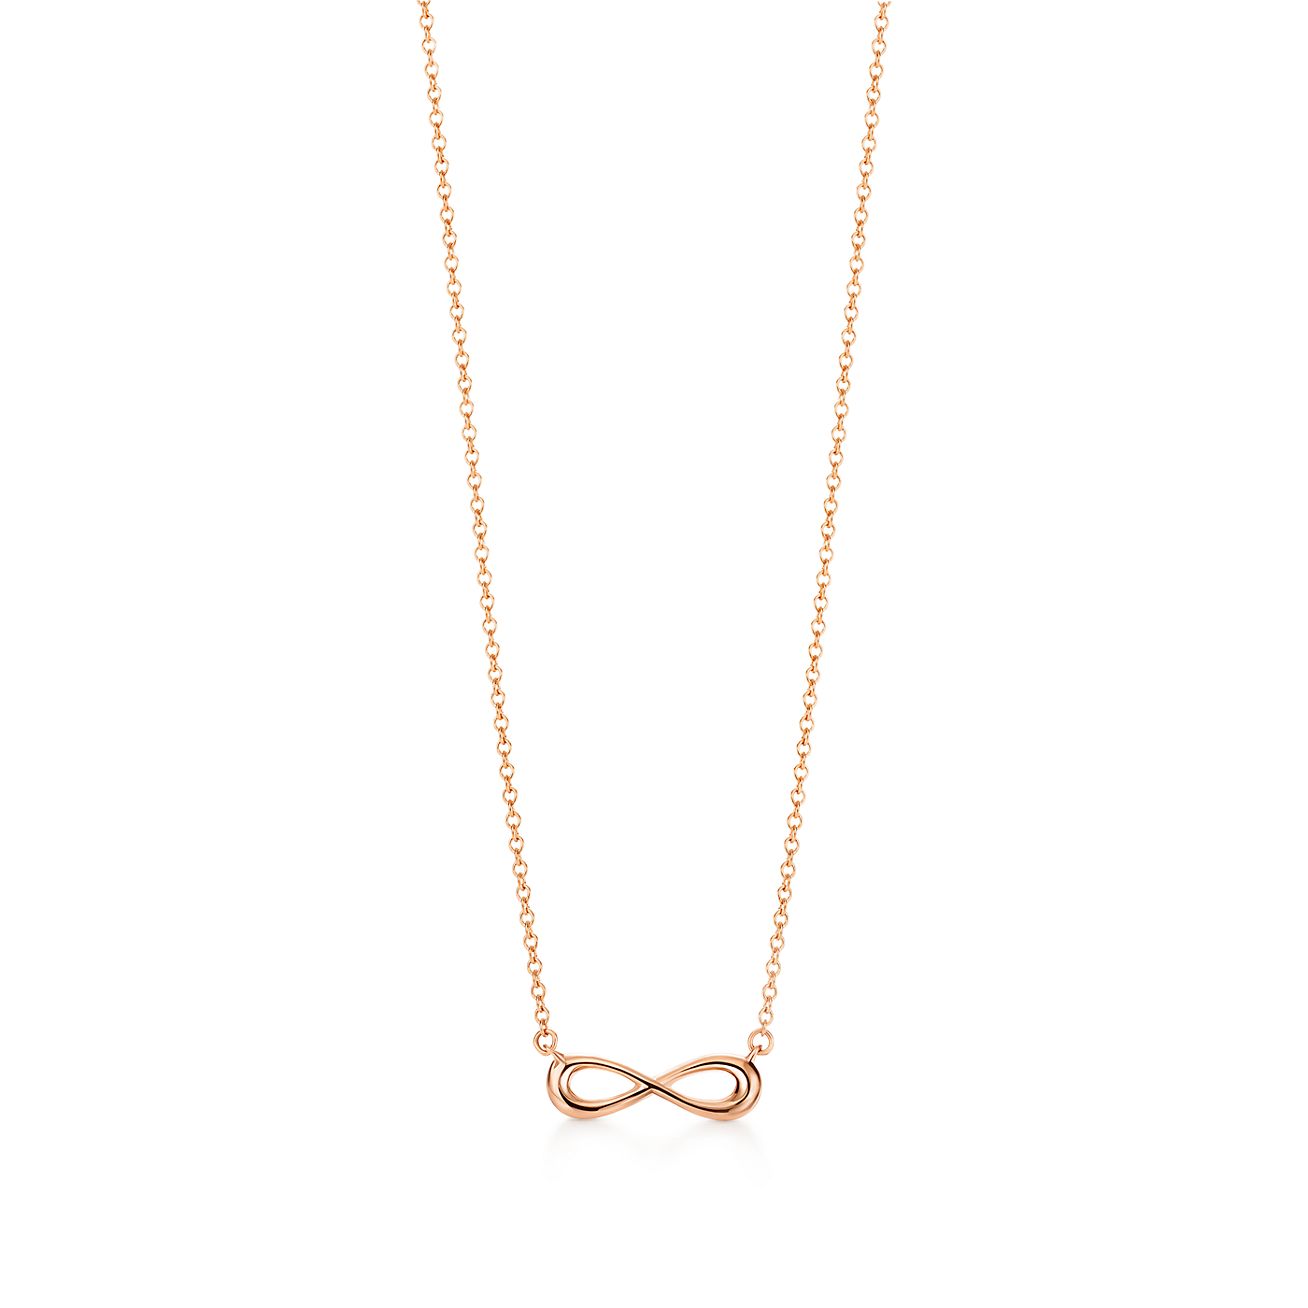 tiffany silver and rose gold necklace